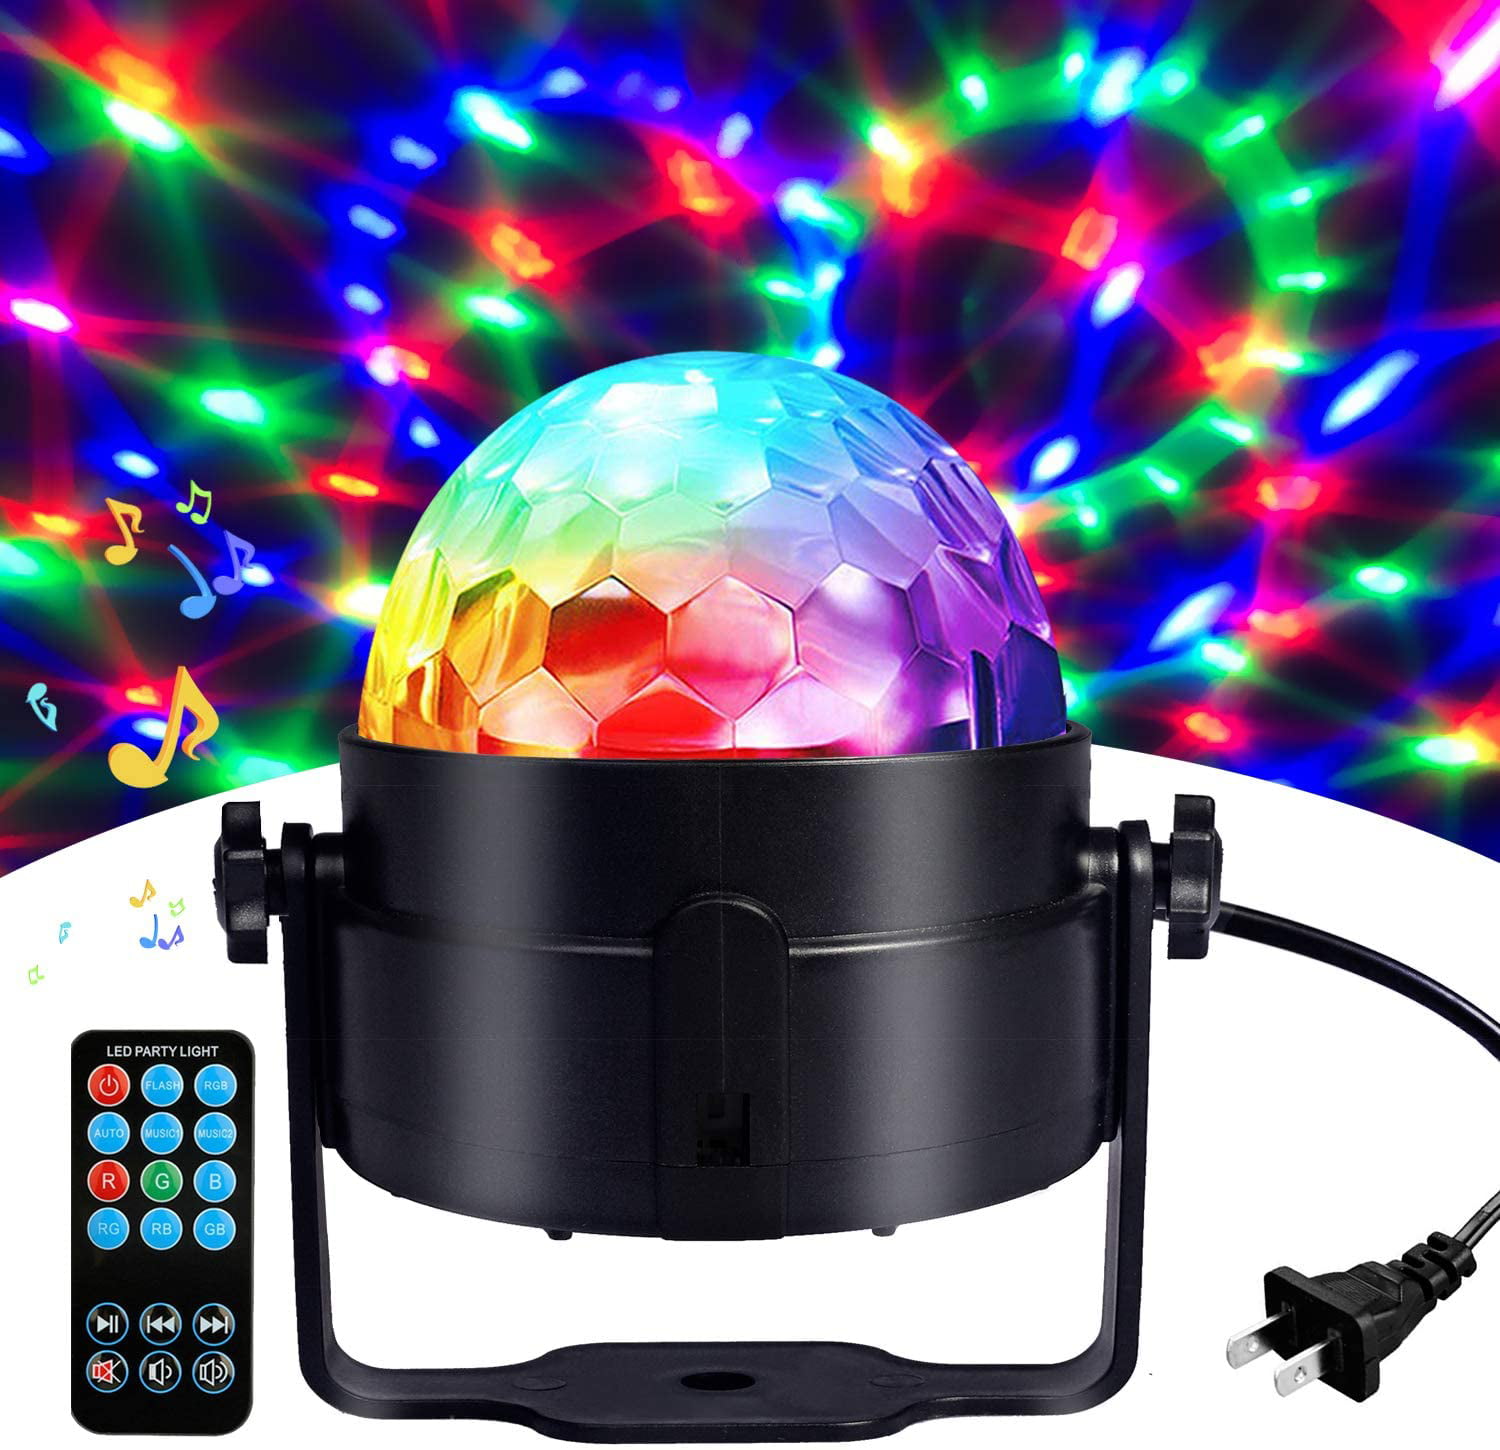 Party Disco Lights Strobe Led Dj Ball Sound Activated Dance Bulb Lamp DecoratioT 